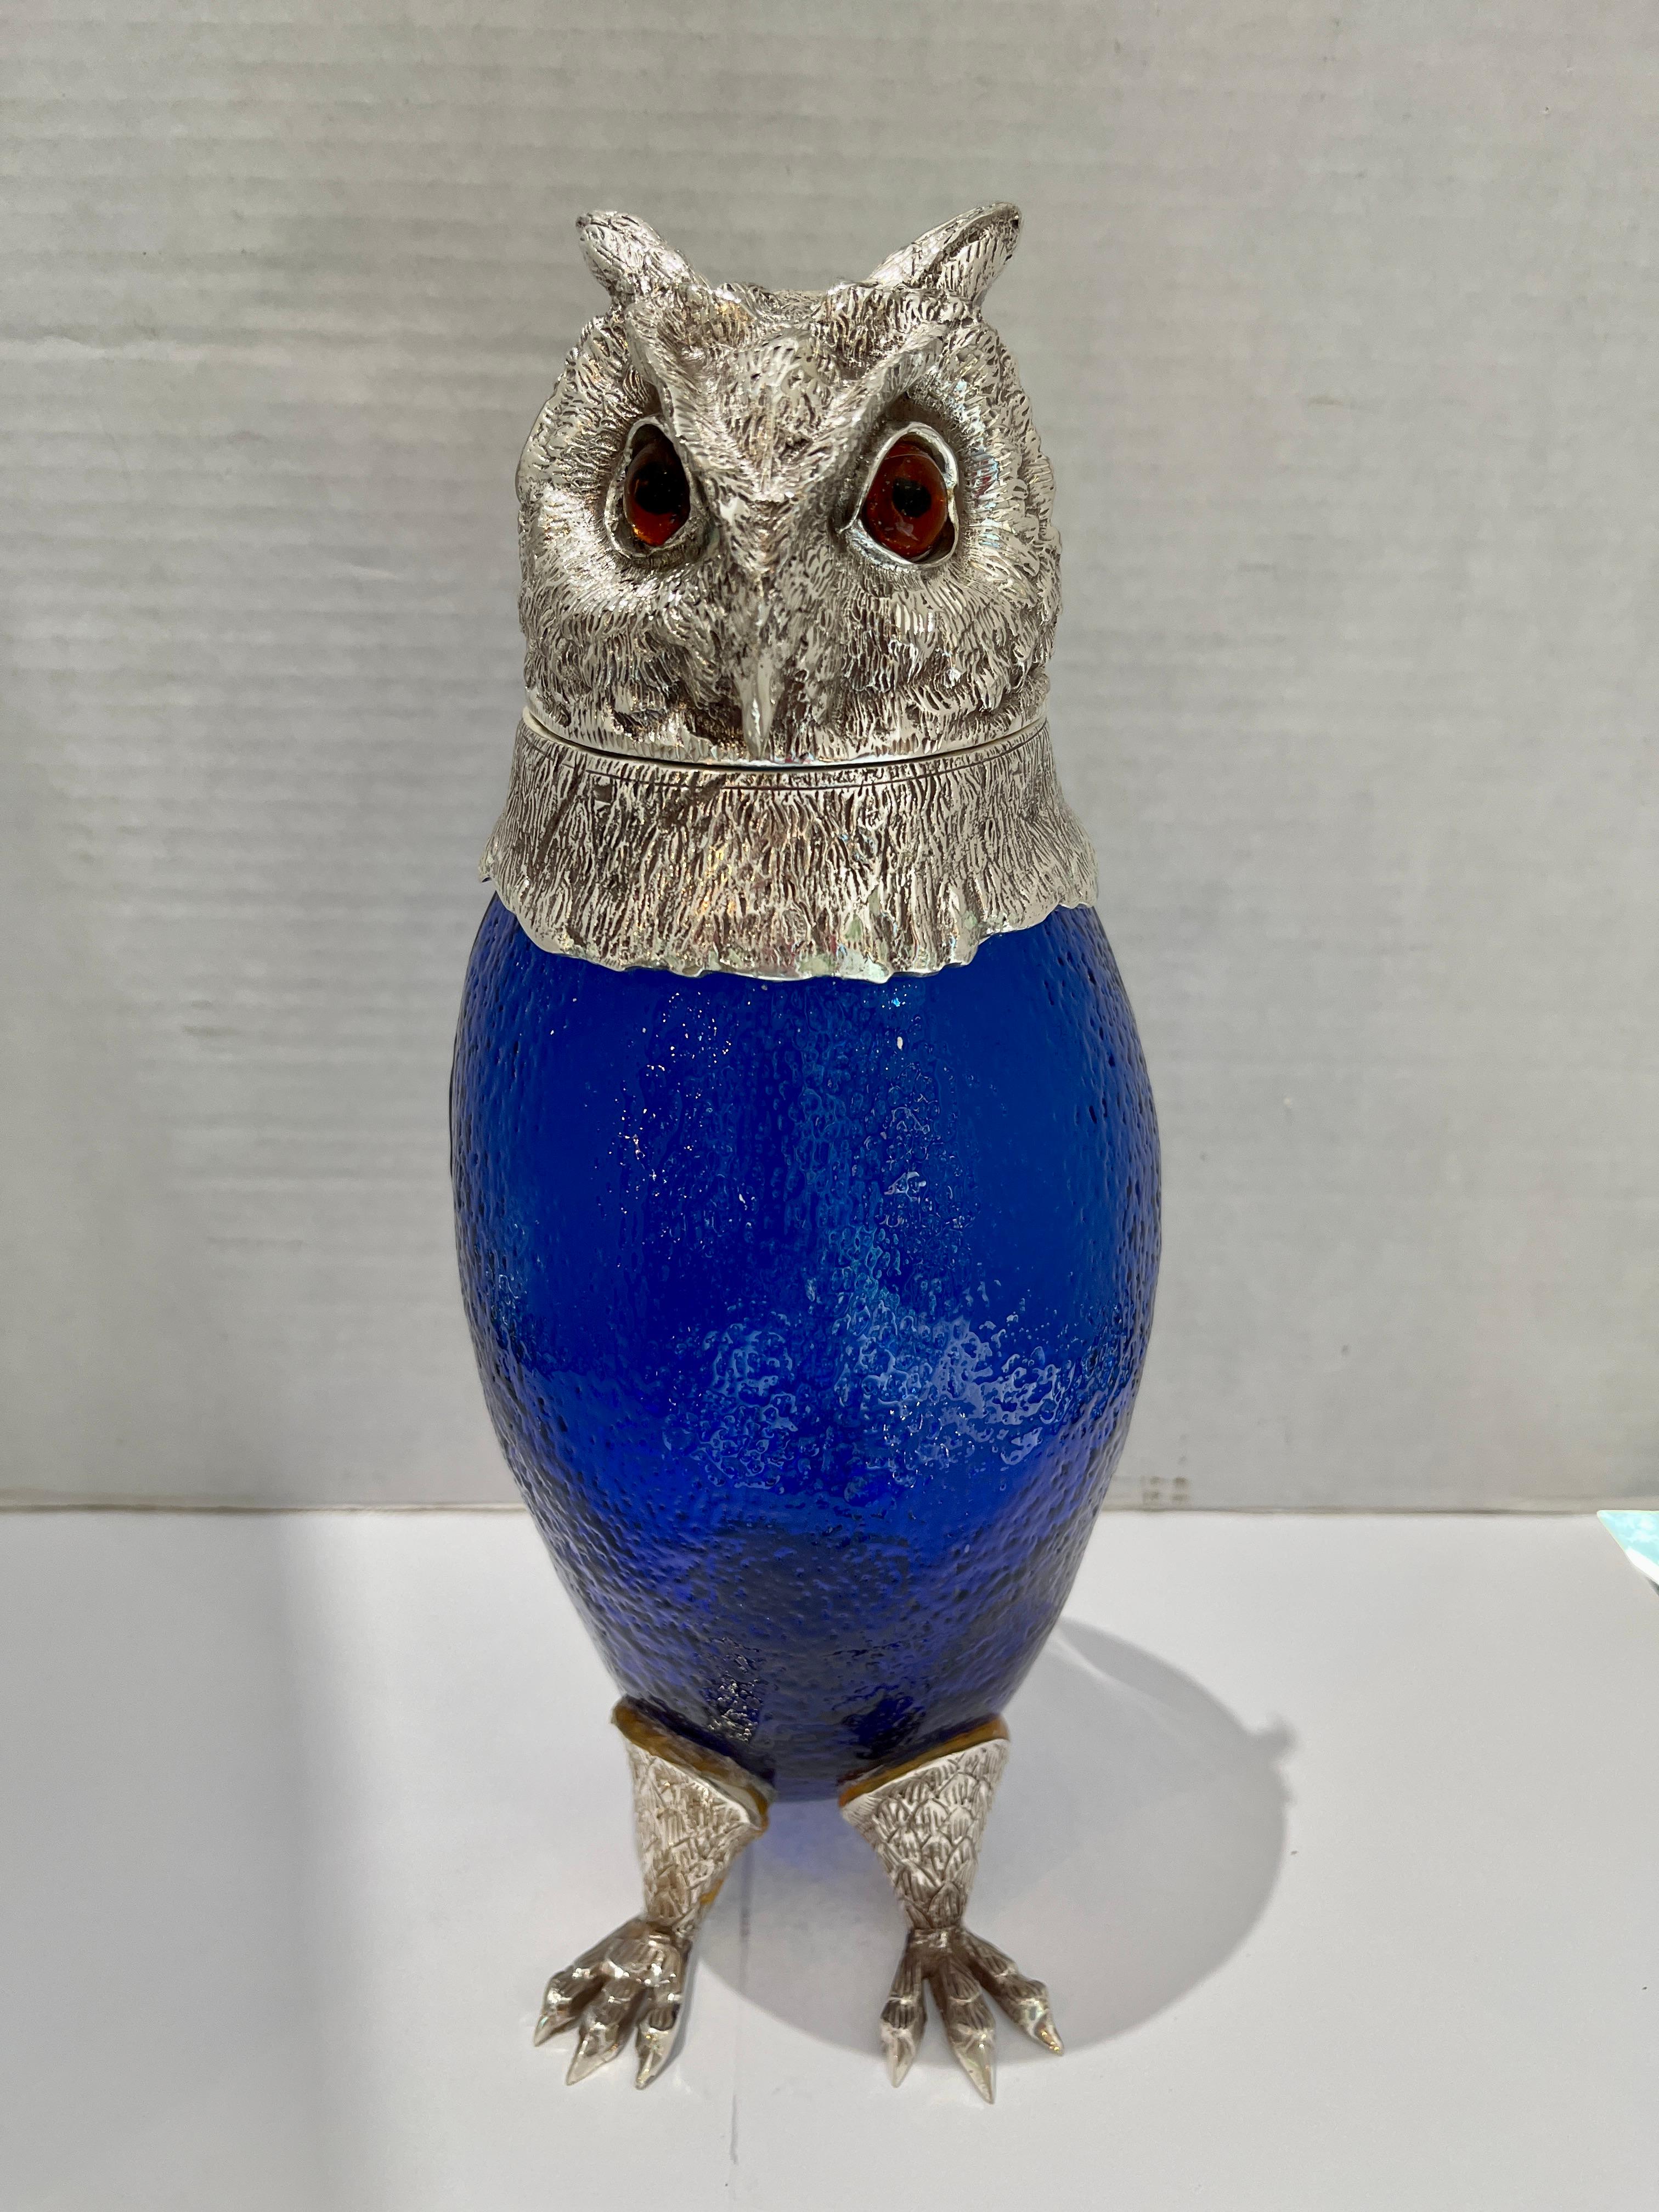 Just in, this striking  English Novelty Silver Plate and Cobalt Blue Glass Owl Claret Jug Decanter.
Very good to excellent condition, consistent with age and use..